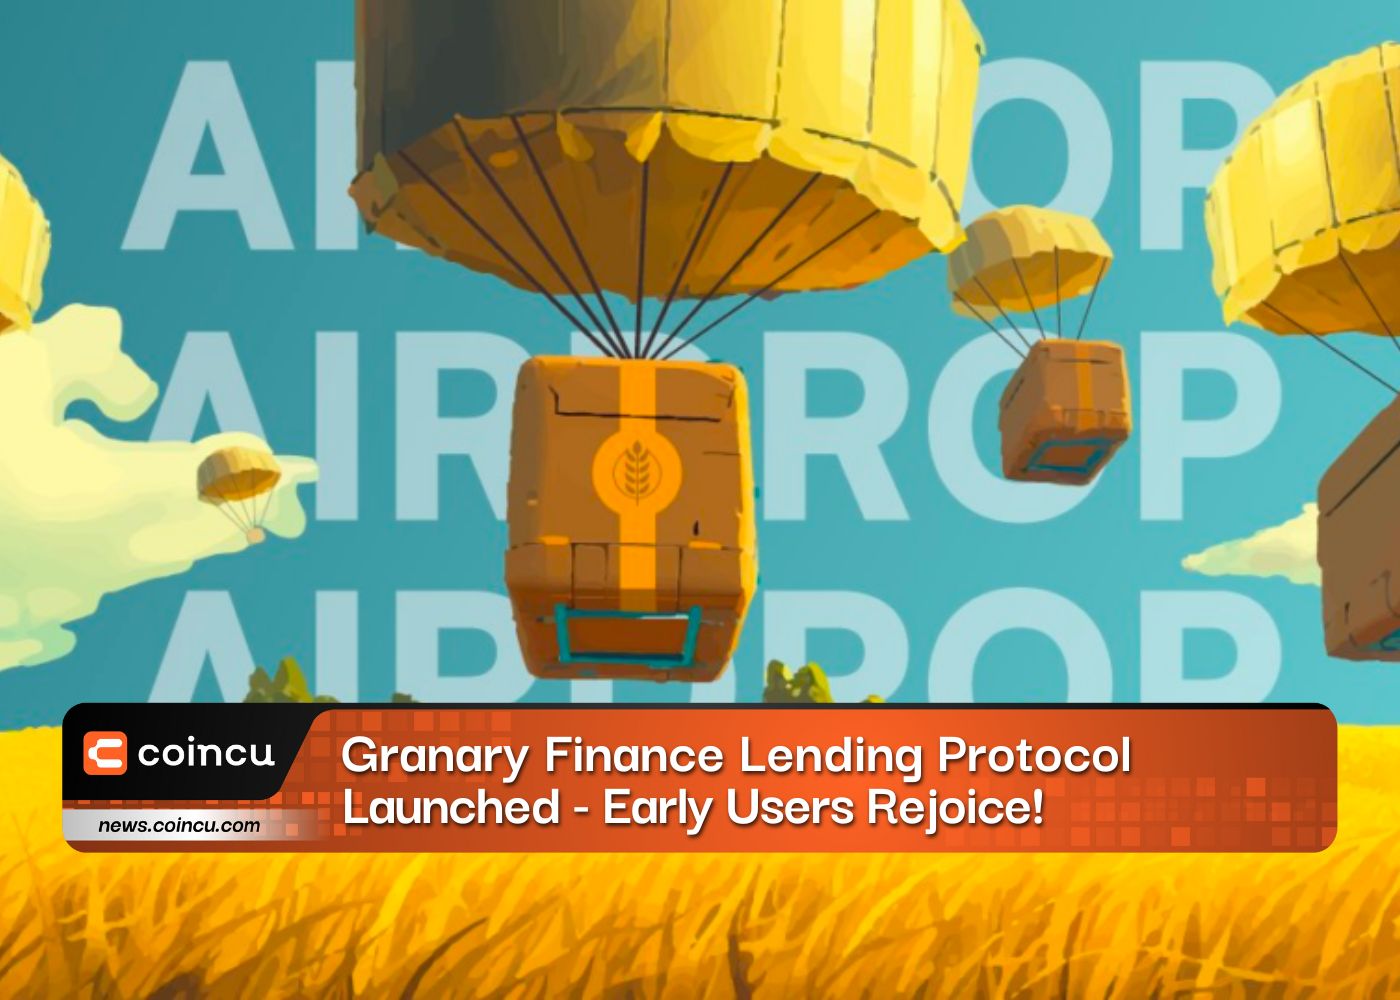 Granary Finance Lending Protocol Launched